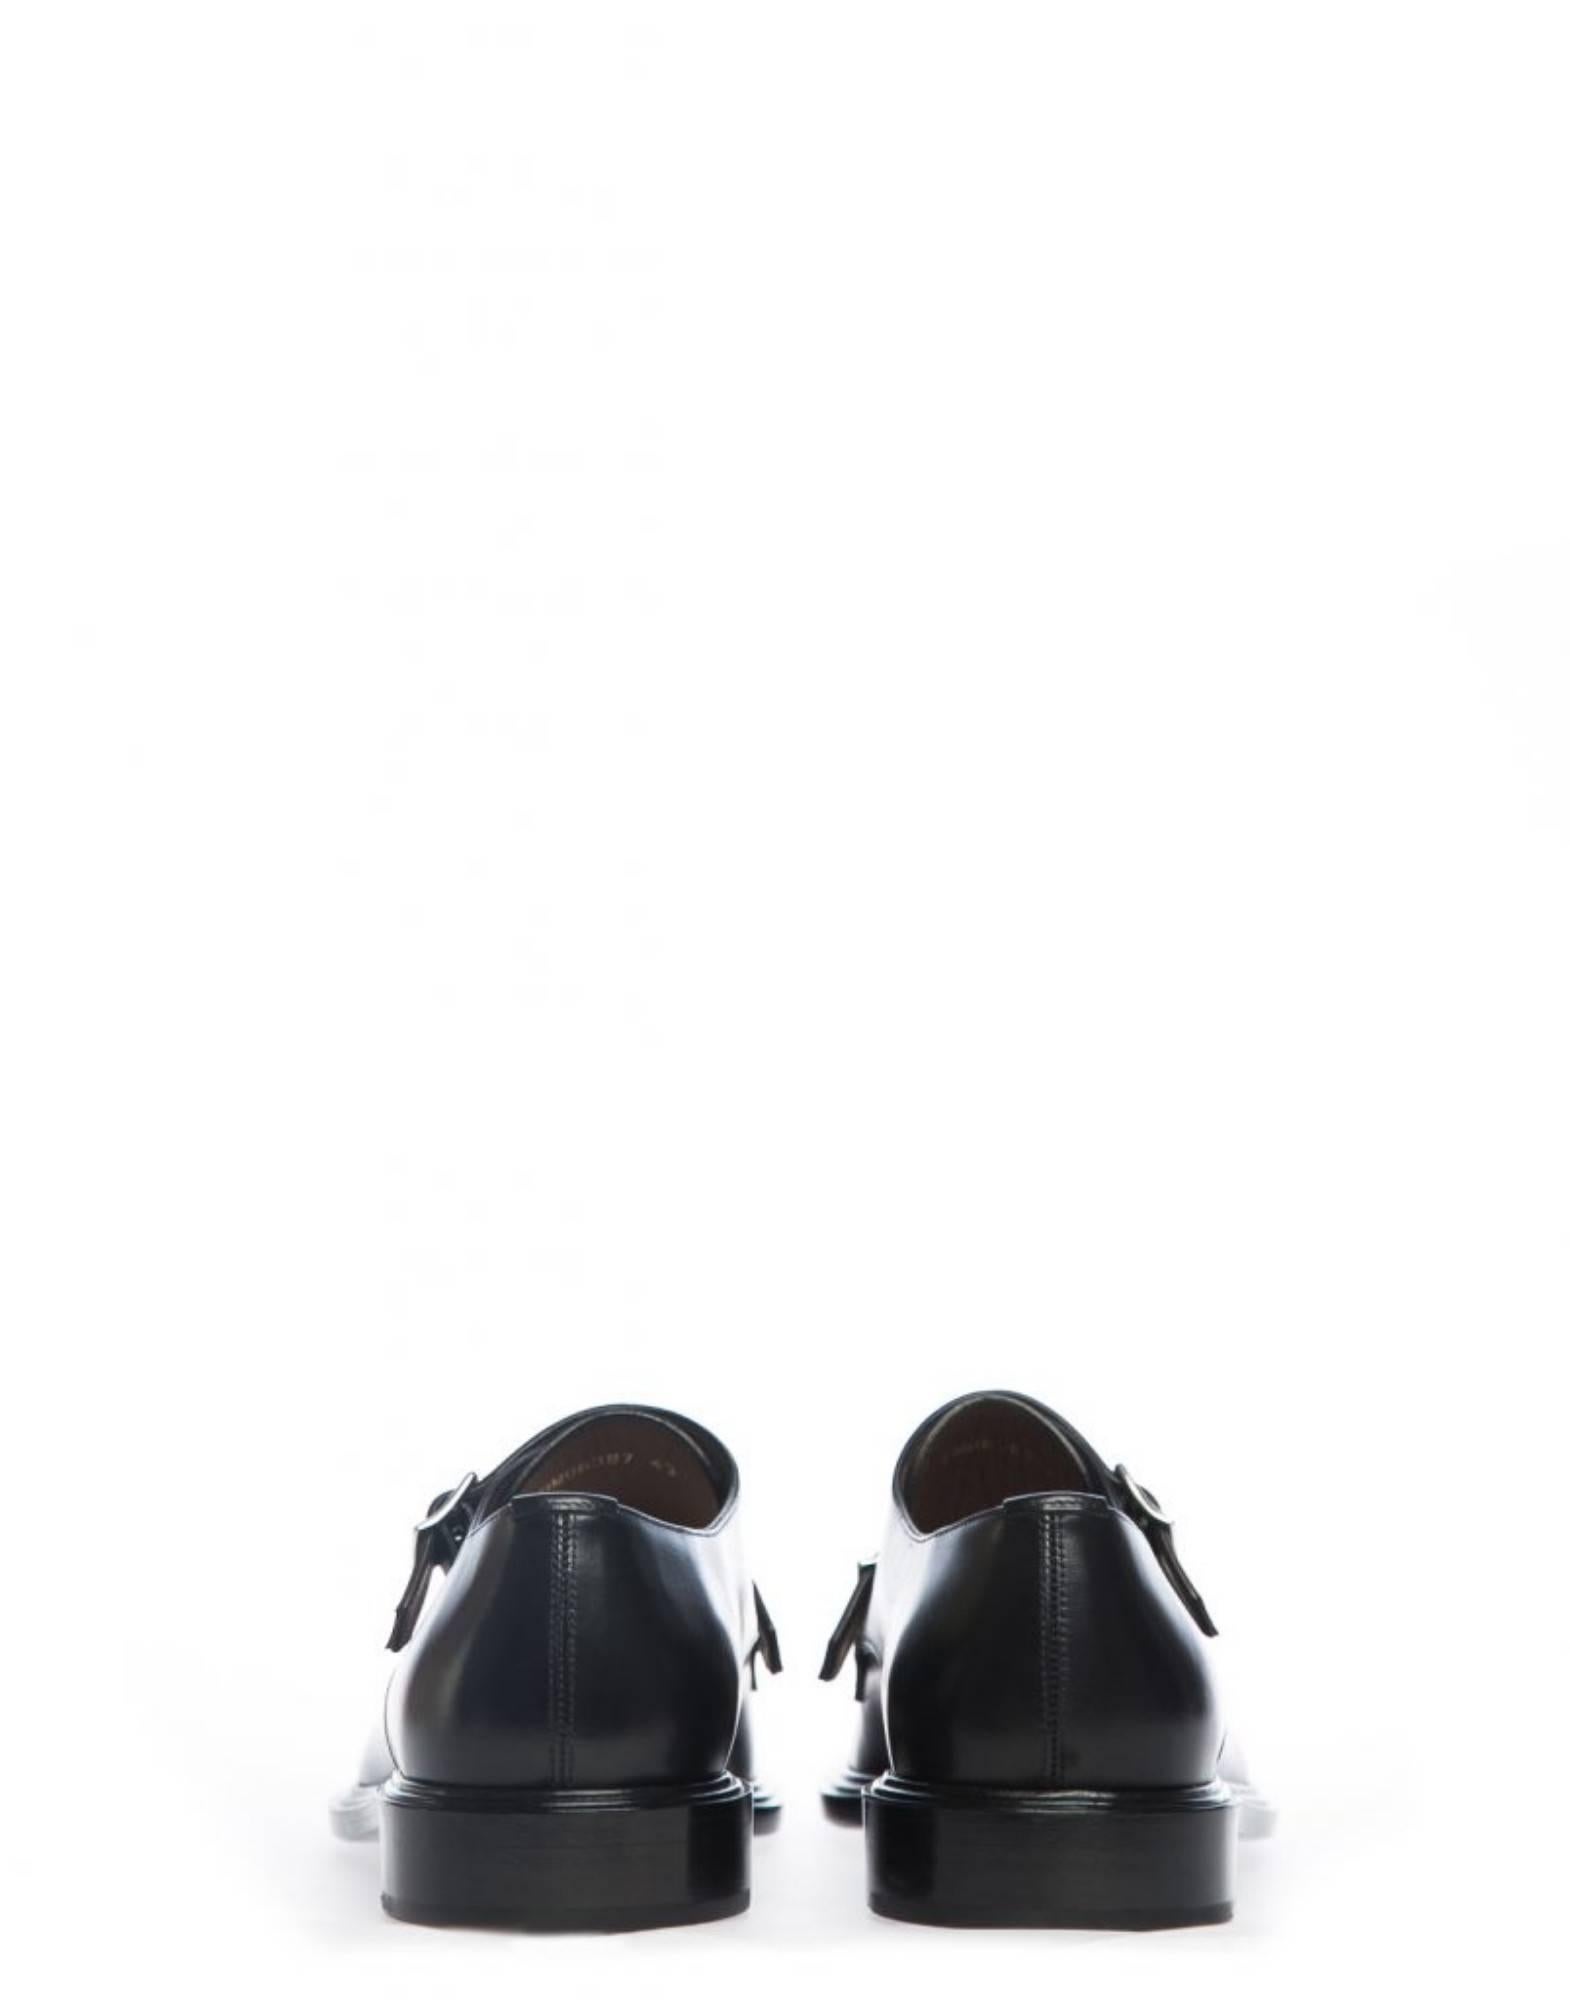 Black Givenchy Double Buckle Monk Strap Shoes (Size - 41) For Sale